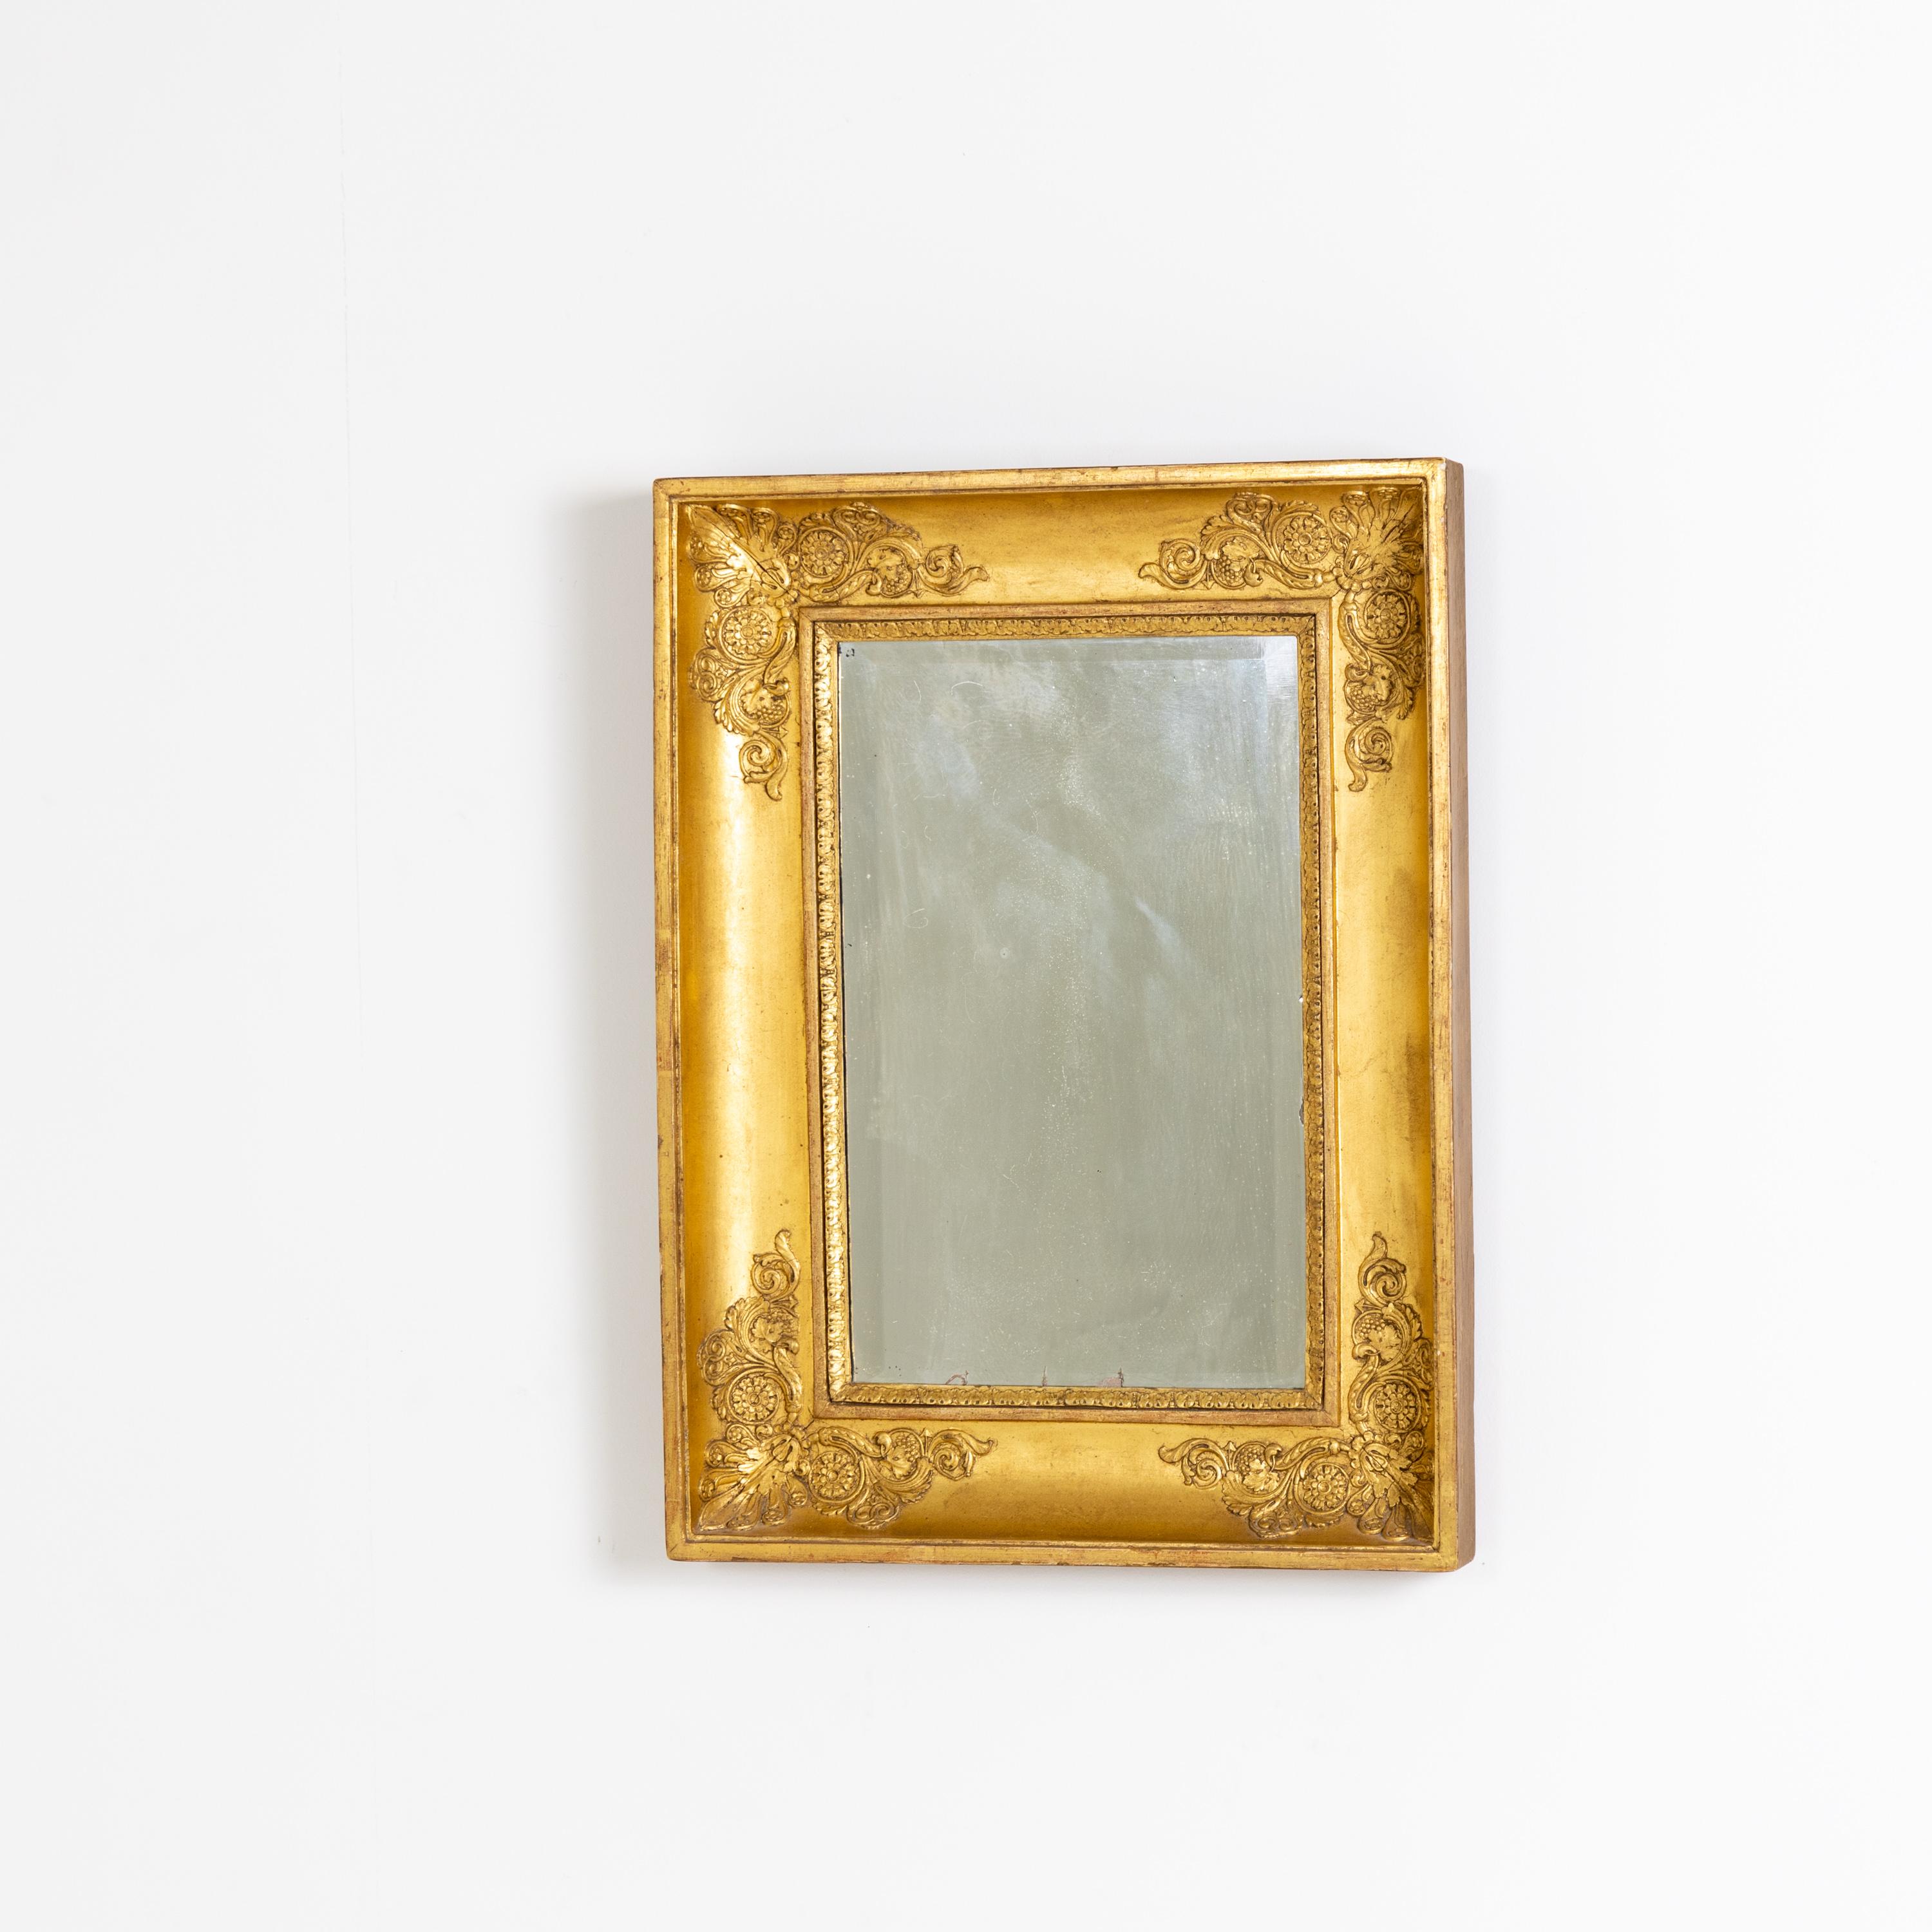 Giltwood Neoclassical Gilt Wall Mirror, Early 19th Century For Sale